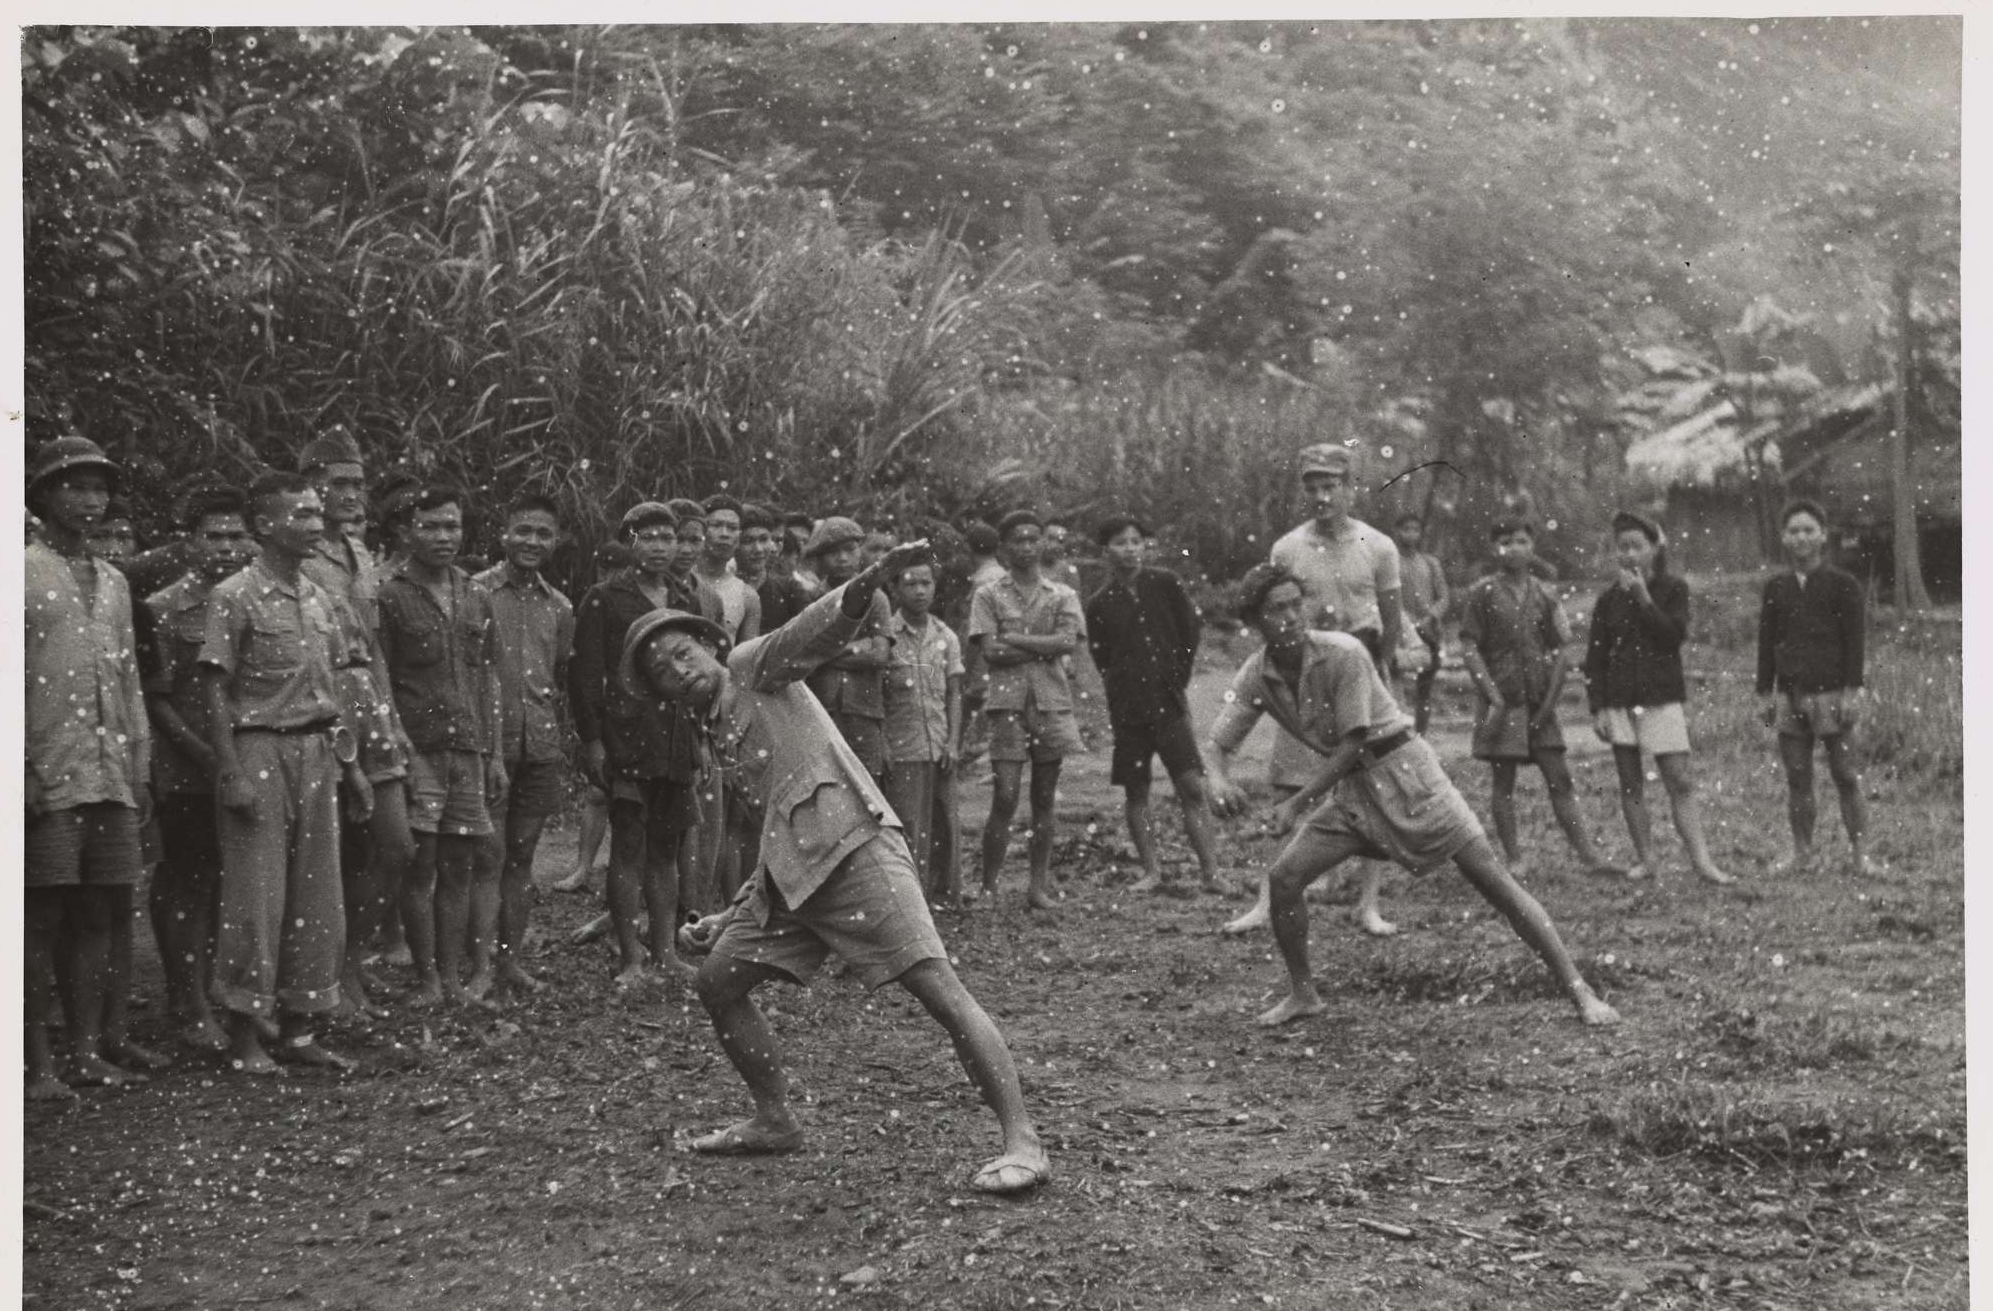 OSS Officers Watch as Viet Minh Practice Throwing Grenades